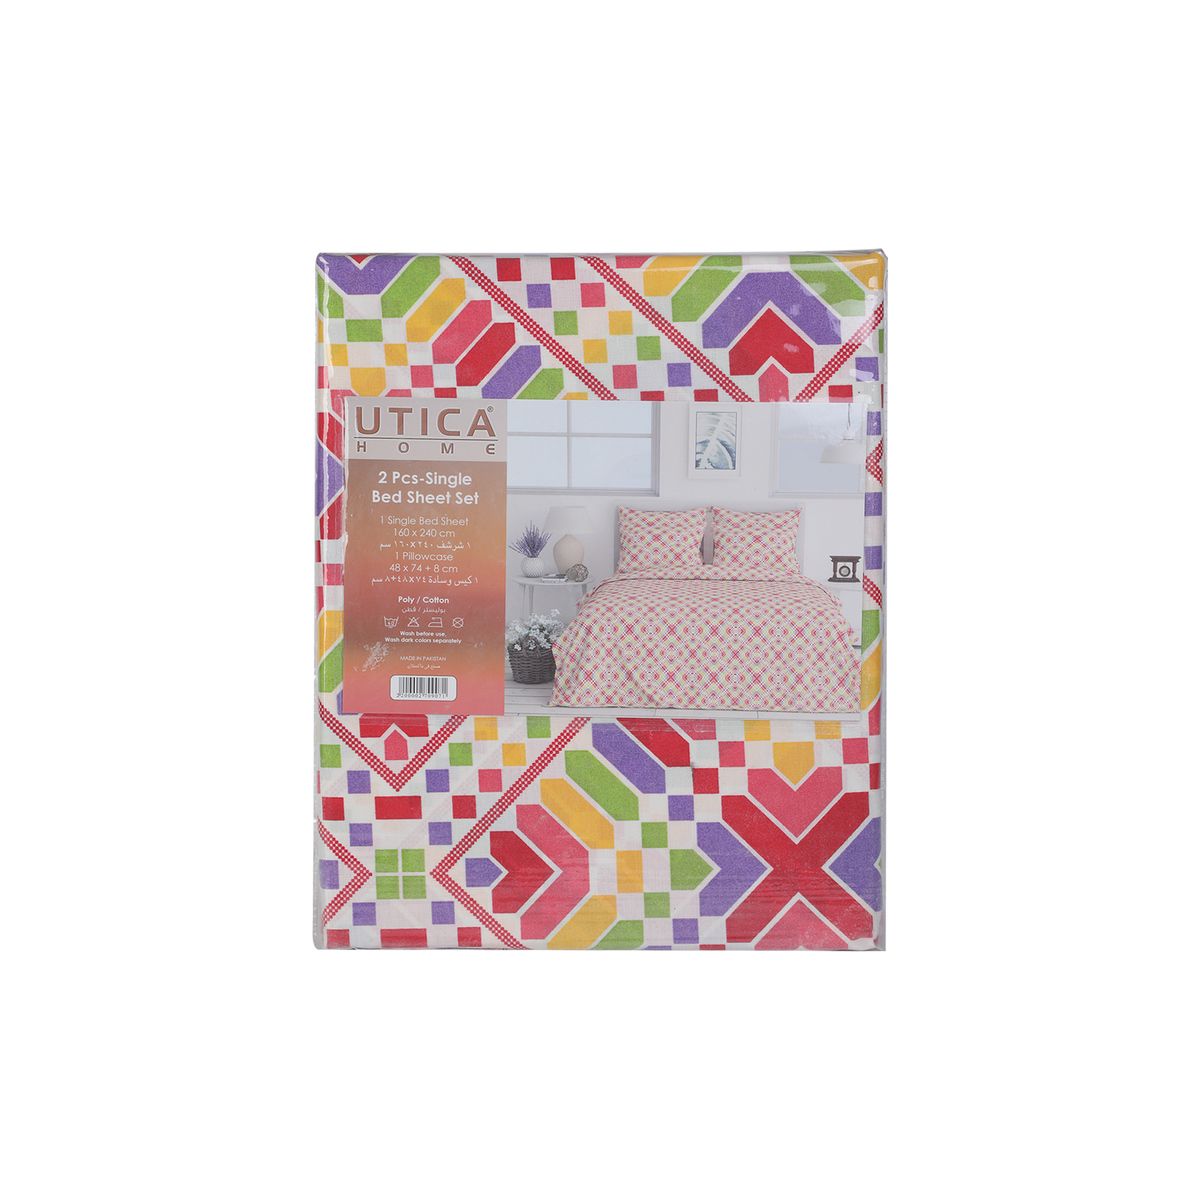 Utica Home Bed Sheet Single 2pc 160x240 cm Assorted